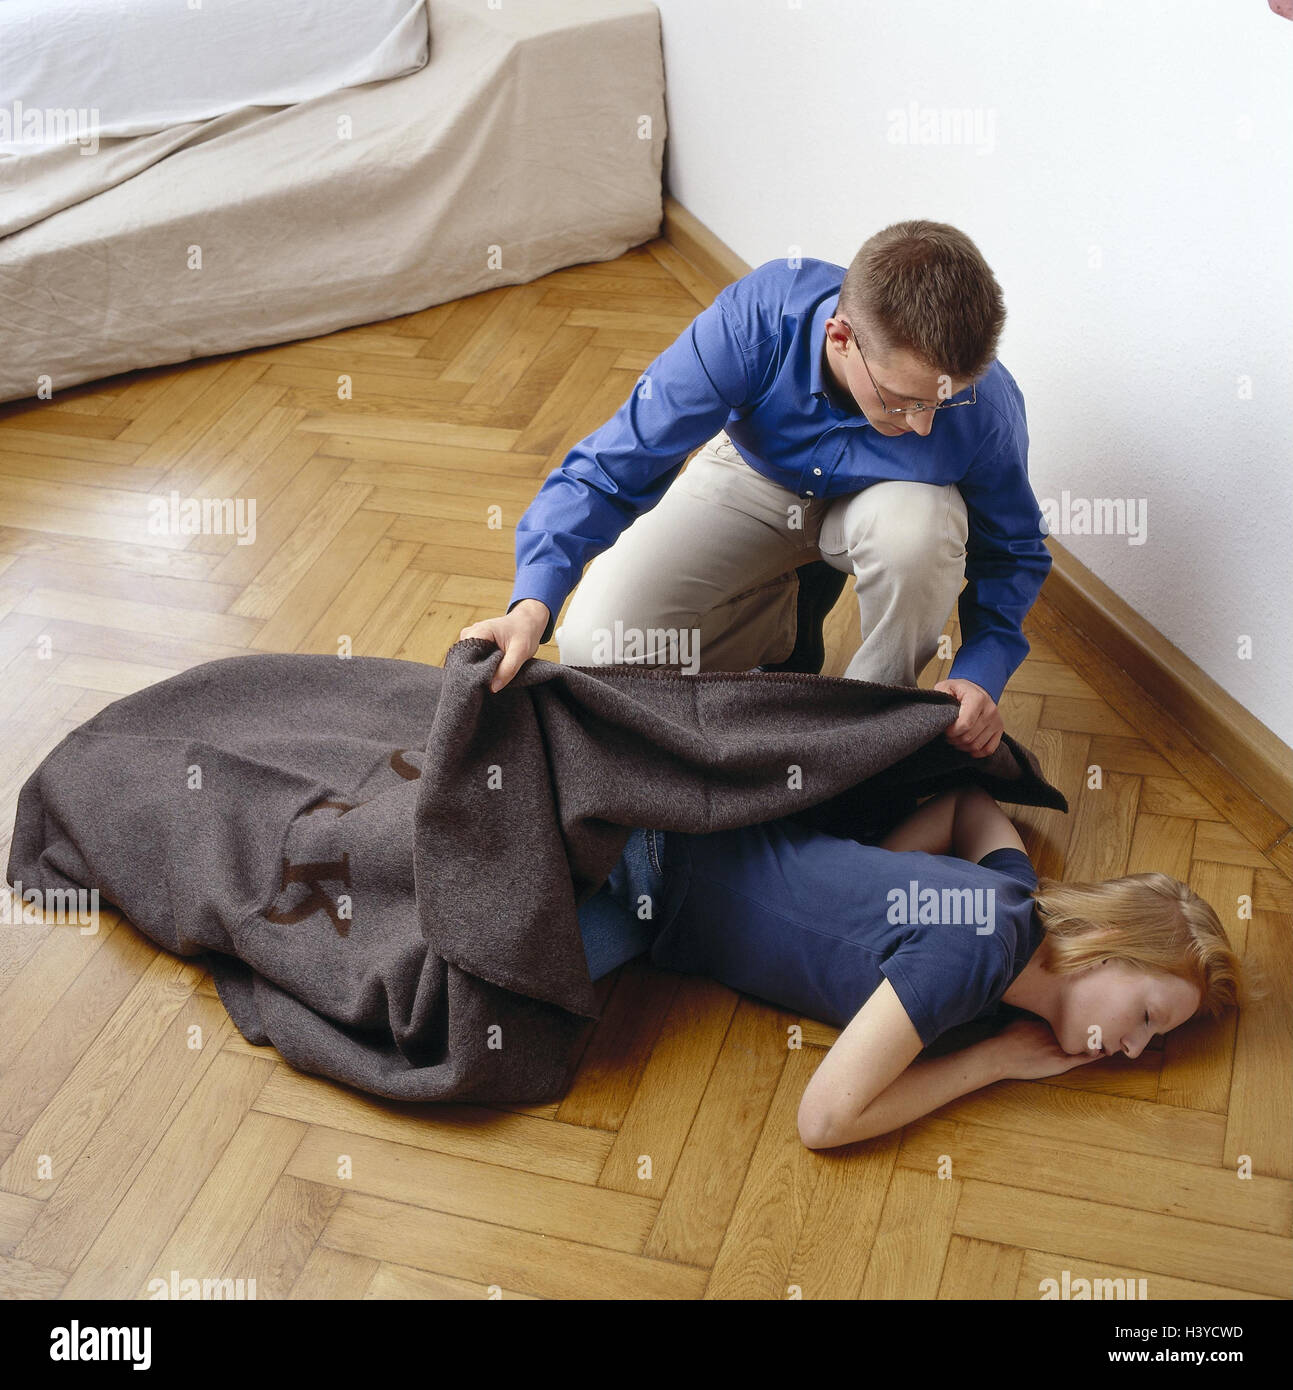 Woman, floor, lie, help unconsciously, man, first supply, woollen blanket, injured persons, accident victims, first help, first aid, medicine, first assistant, stable page position, faint, in need care, care, supply, inside Stock Photo